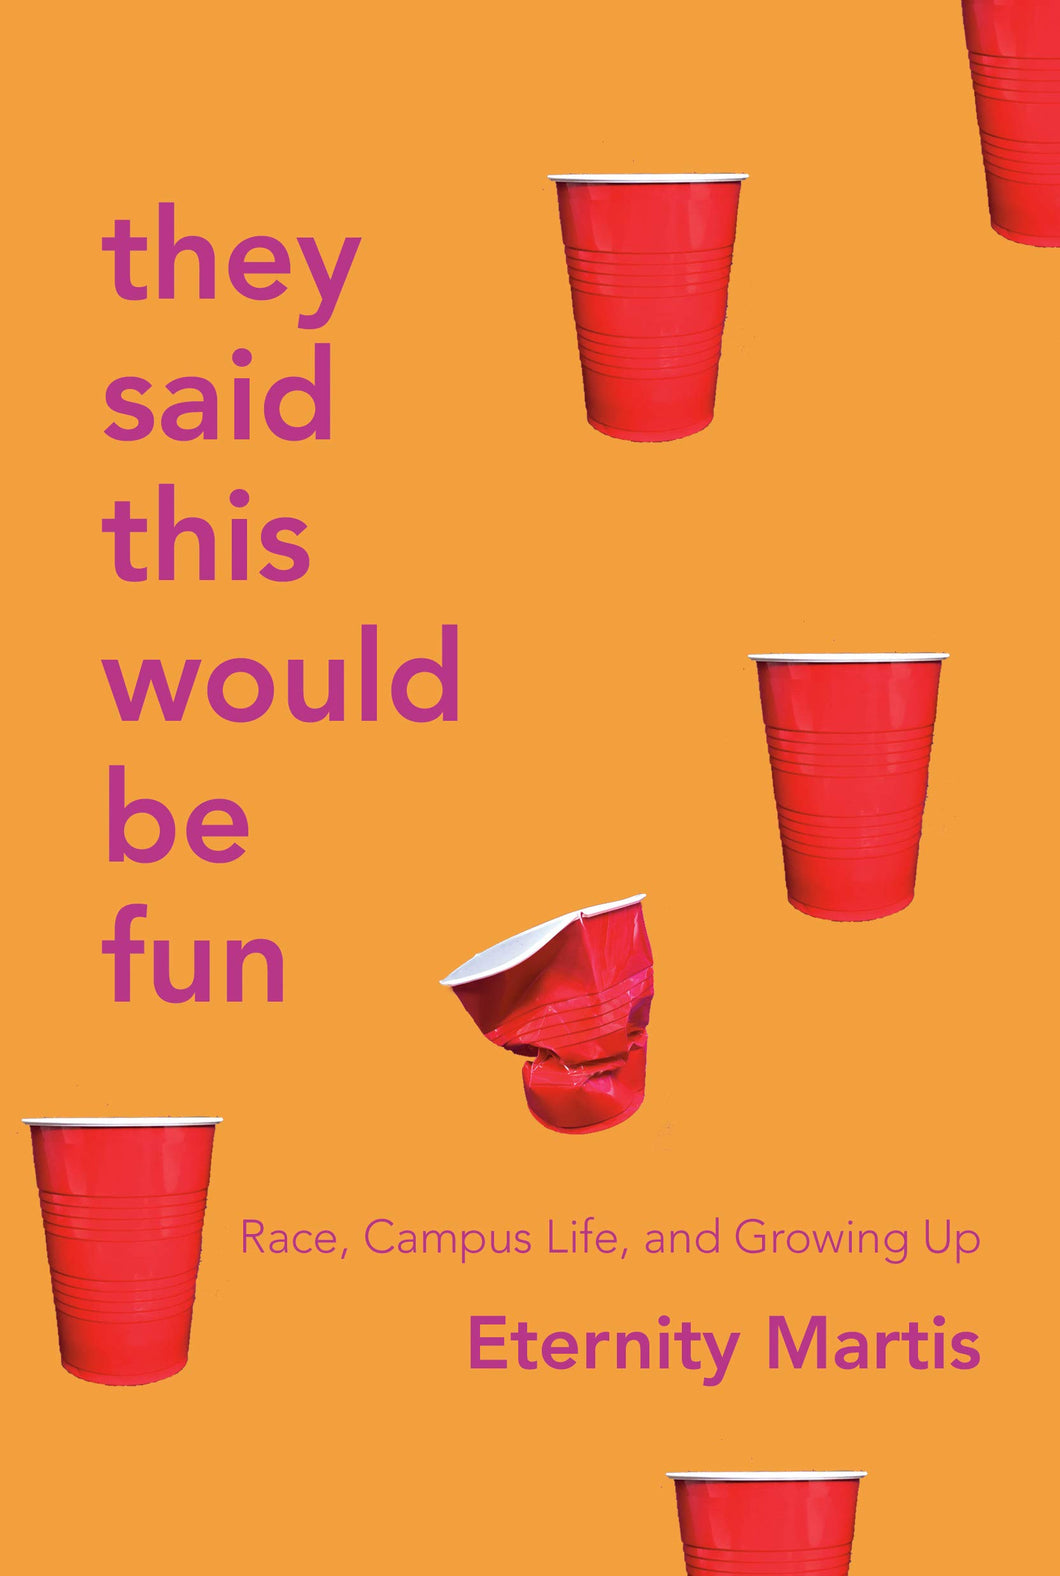 They Said This Would Be Fun: Race, Campus Life, and Growing Up [Eternity Martis]